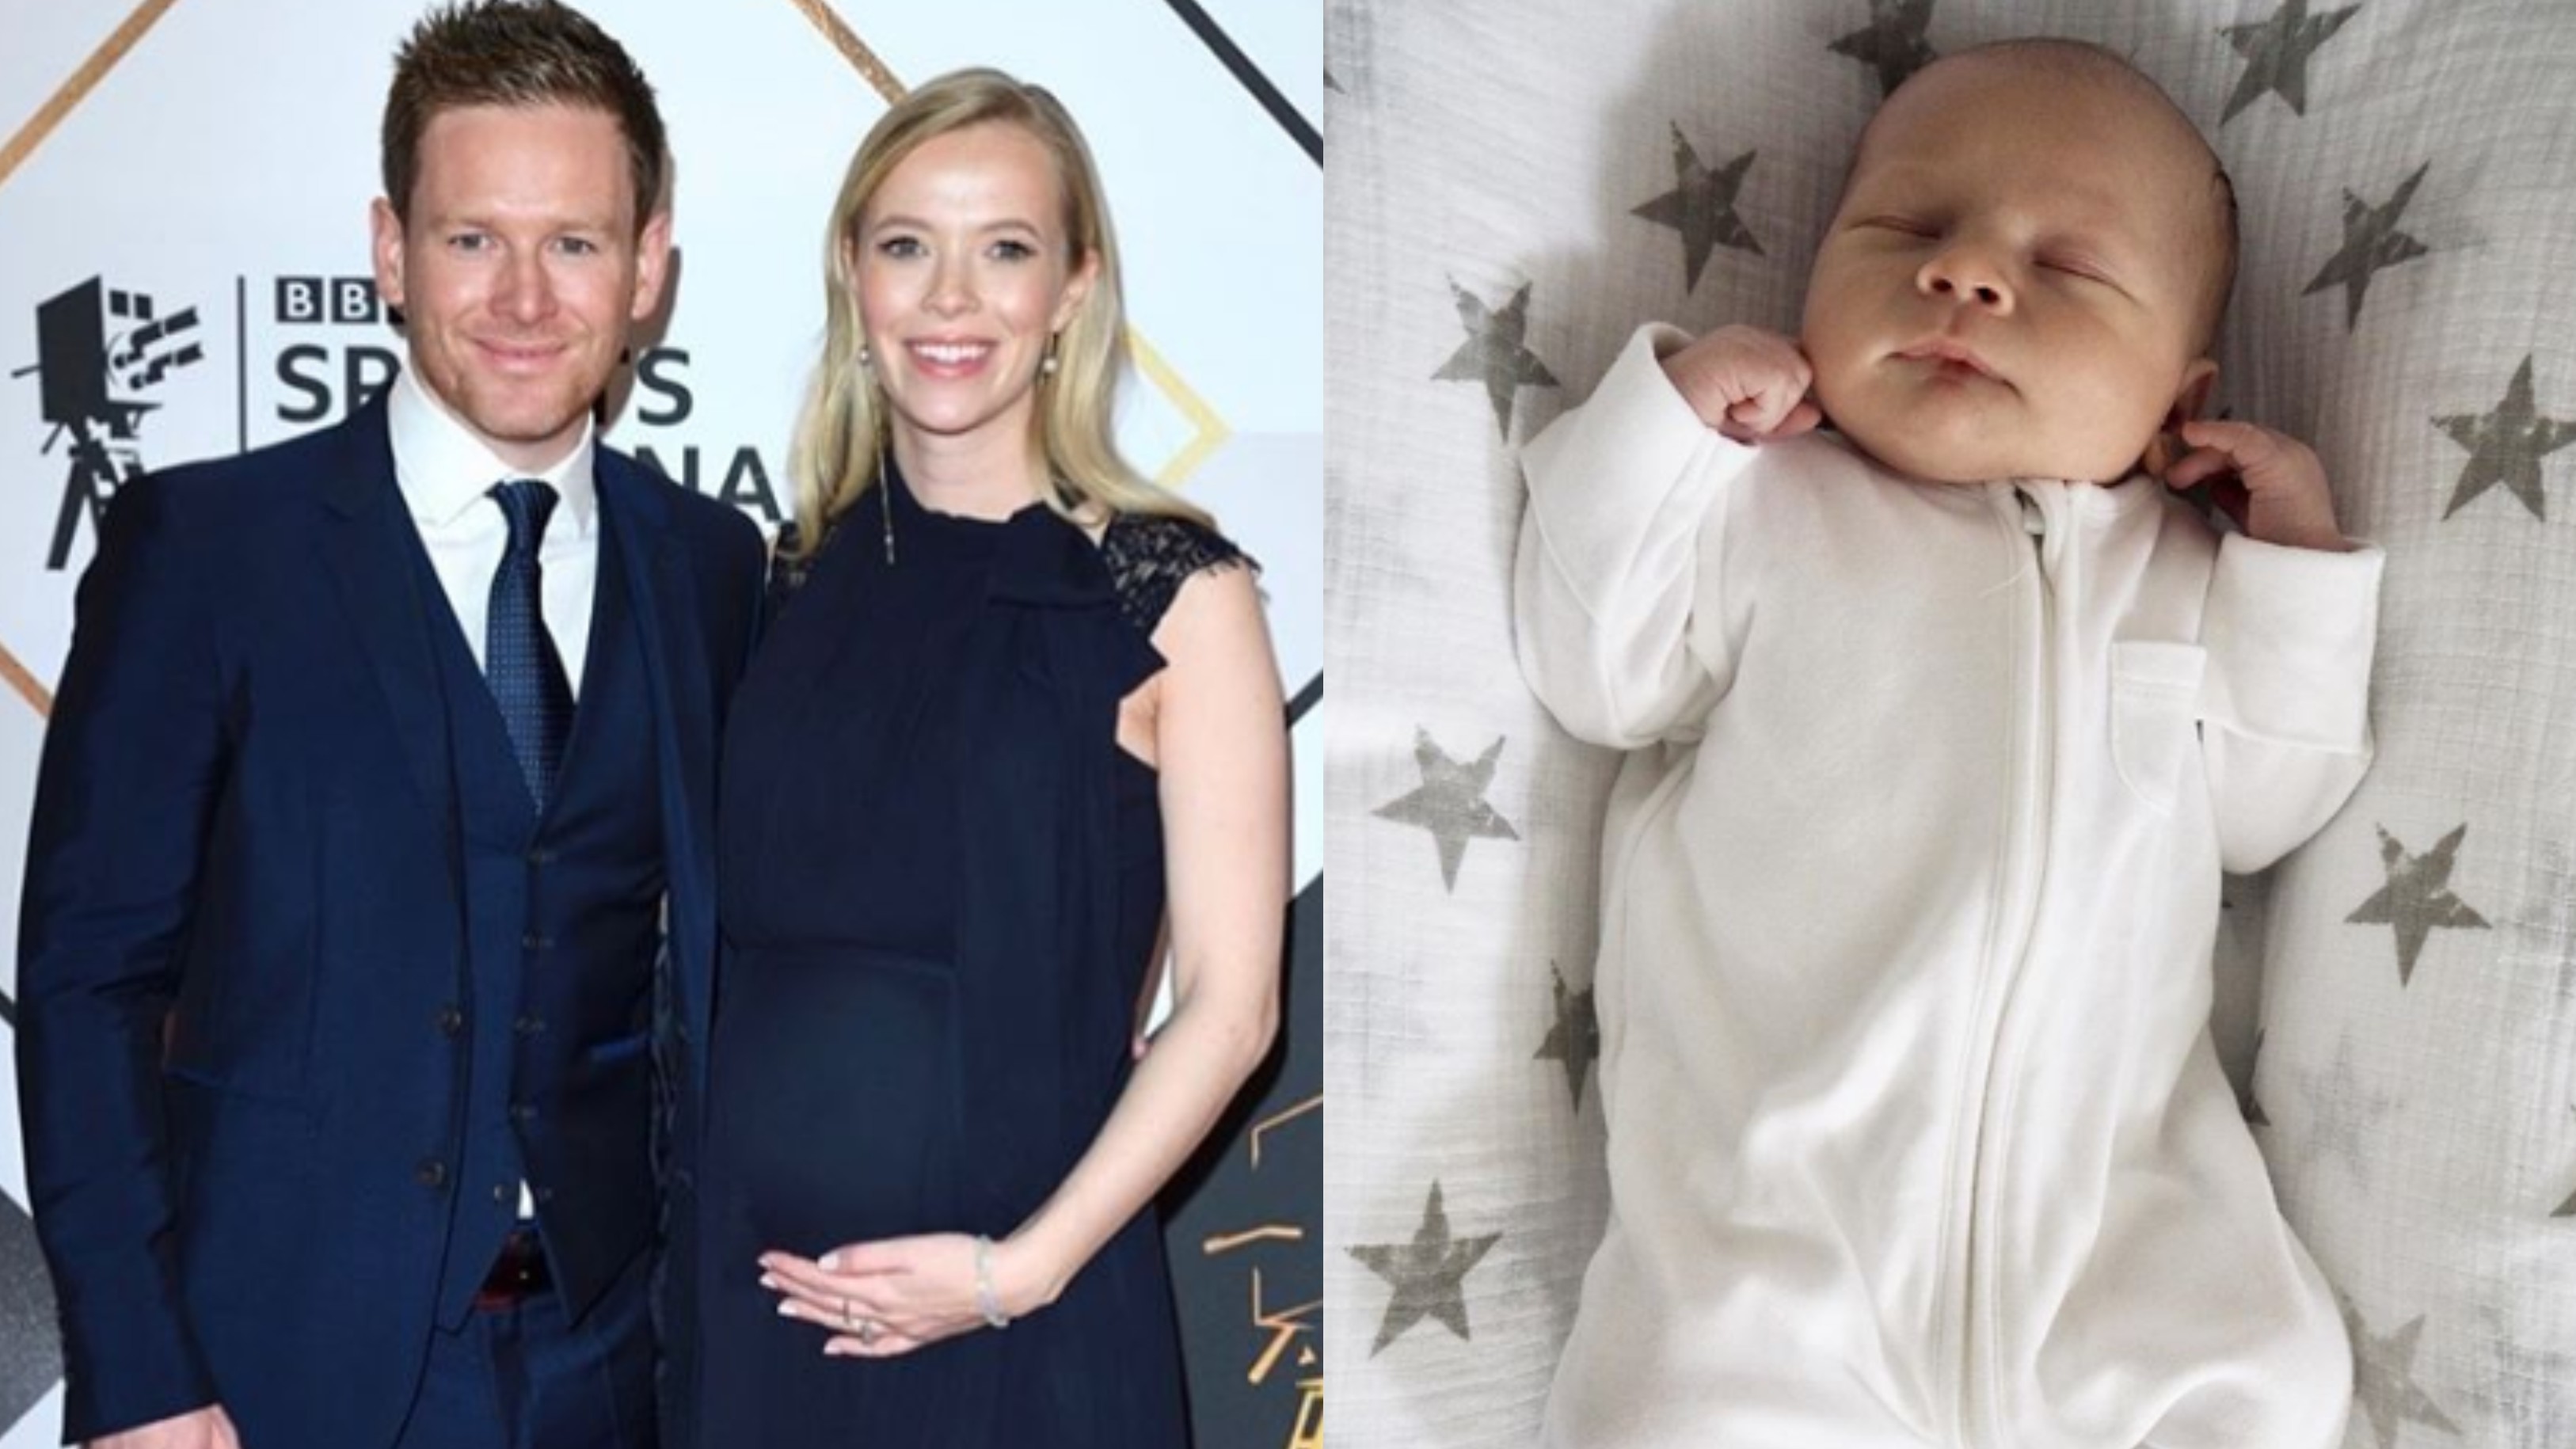 Eoin Morgan and wife Tara welcome their first child; share picture of the newborn